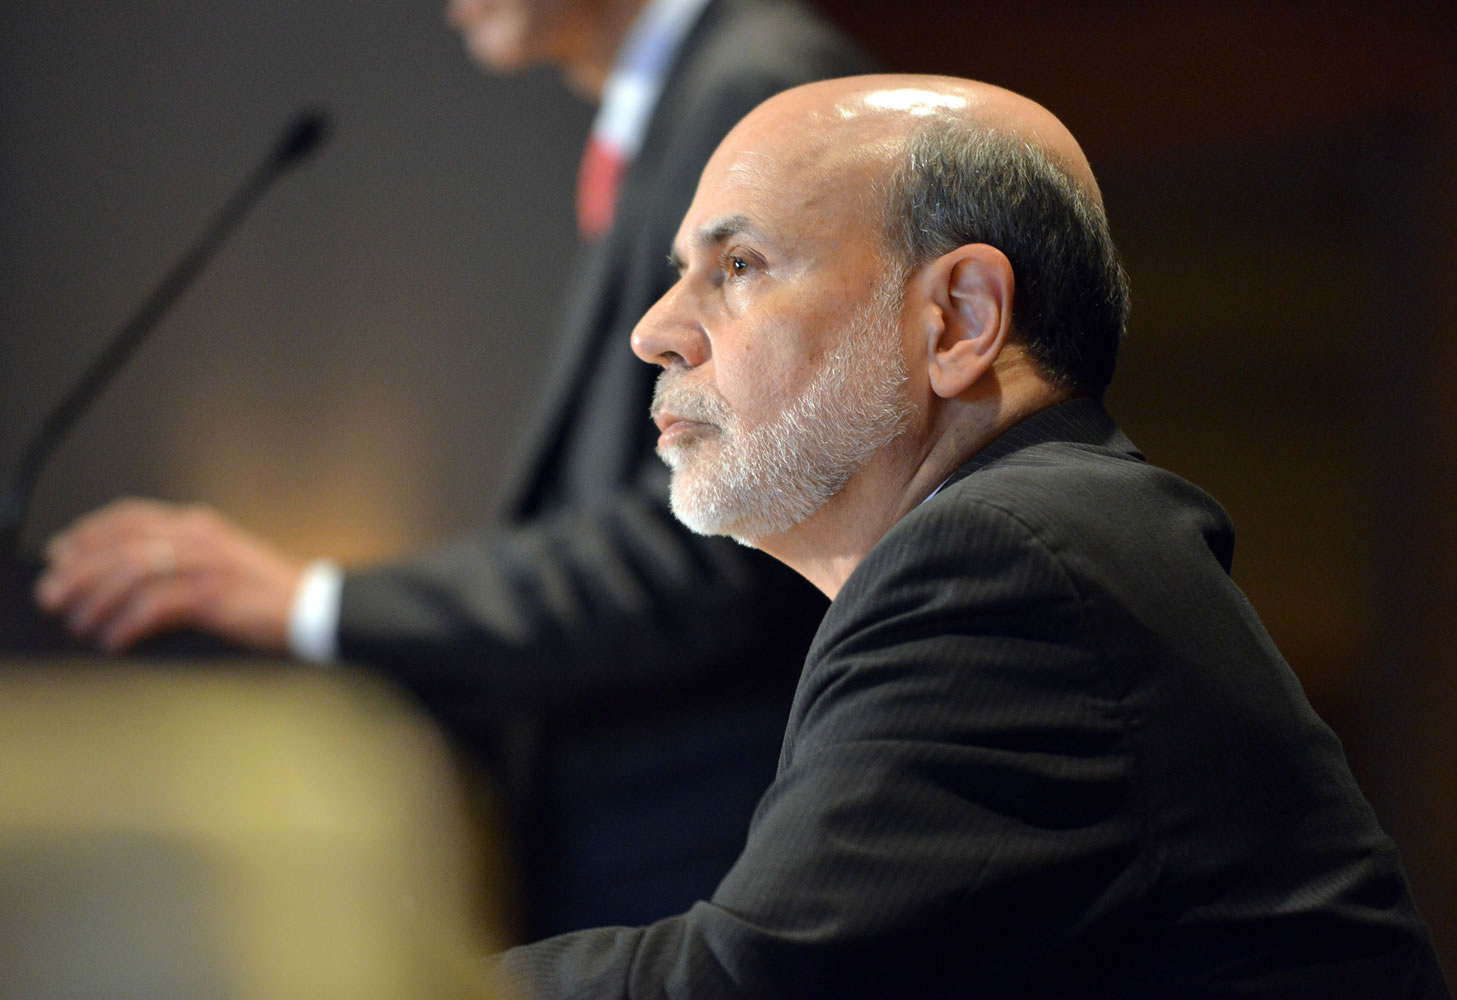 Federal Reserve Board Chairman Ben Bernanke listens to during his introduction at the National Bureau of Economic Research Wednesday, July 10, 2013, in Cambridge, Mass. Bernanke spoke after the markets closed with stocks fluctuating between small gains and losses Wednesday morning, before the Federal Reserve released minutes from its most recent meeting.